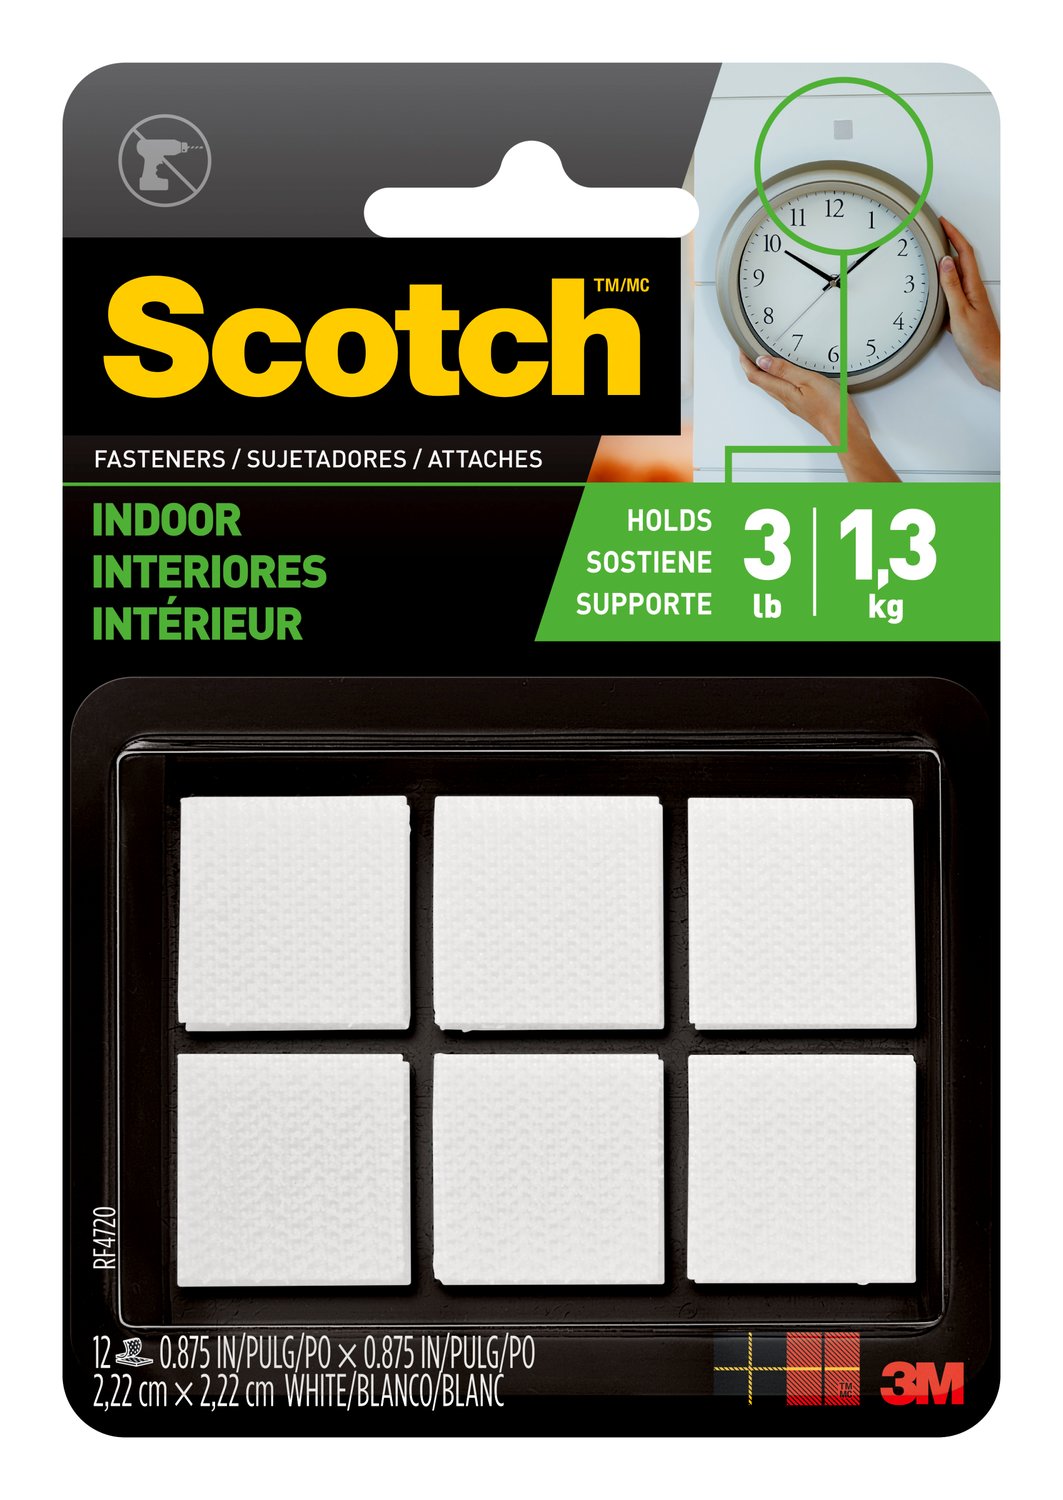 7100103512 - Scotch Indoor Fasteners RF4720, 7/8 in x 7/8 in (22,2 mm x 22,2 mm),
White, 12 Sets of Squares